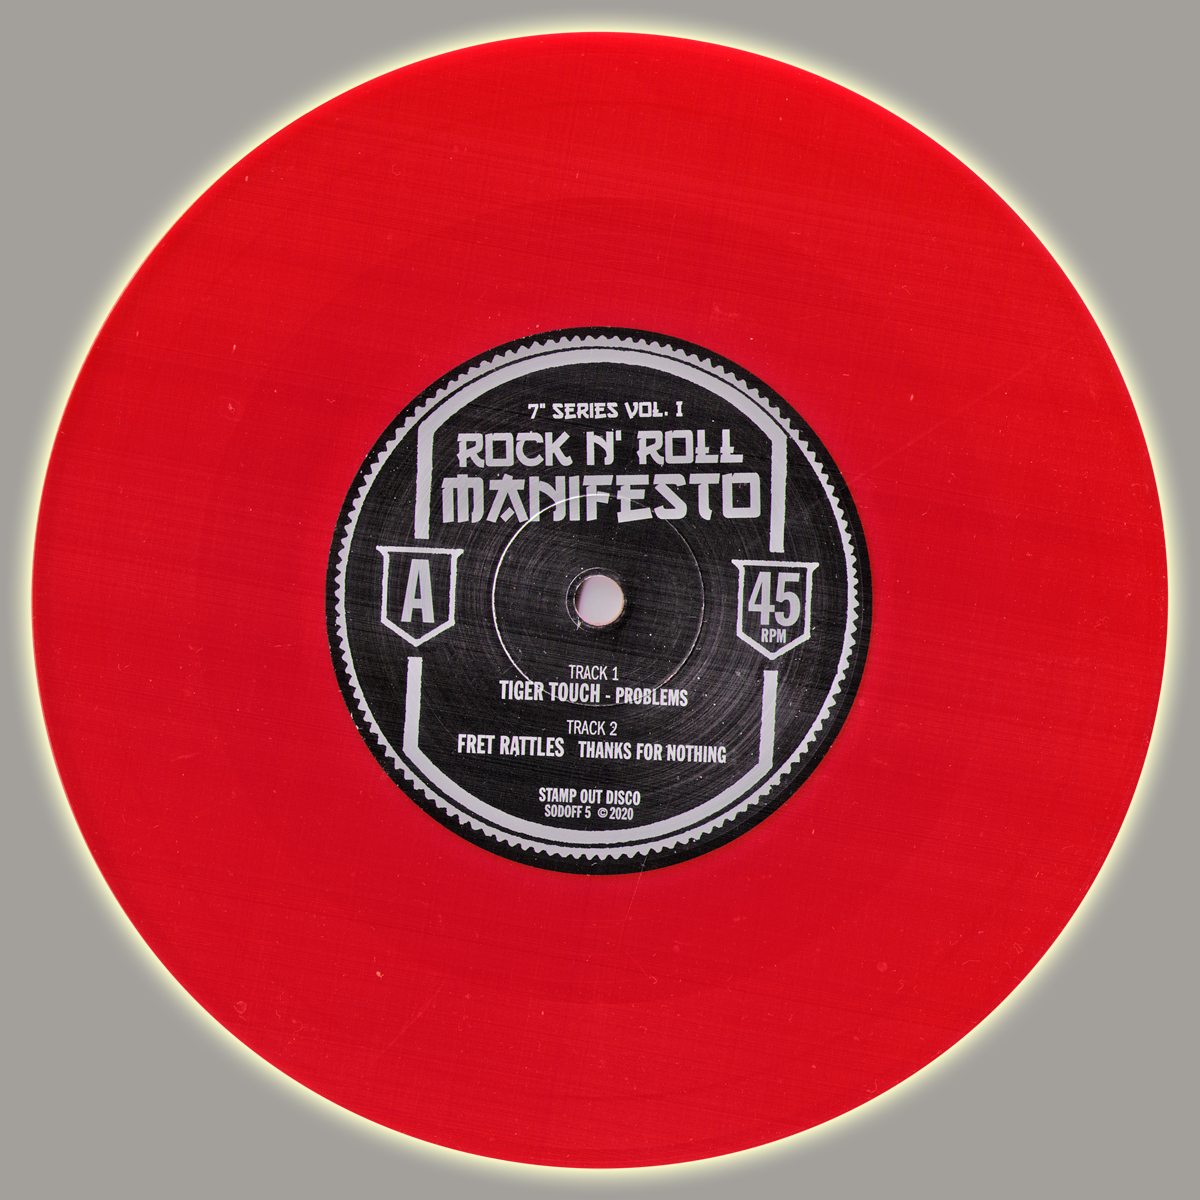 V/A- Rock 'n Roll Manifesto 7" Series Vol. 1 7" ~W/ TIGER TOUCH, MISSILE STUDS + RARE BLOOD RED WAX!